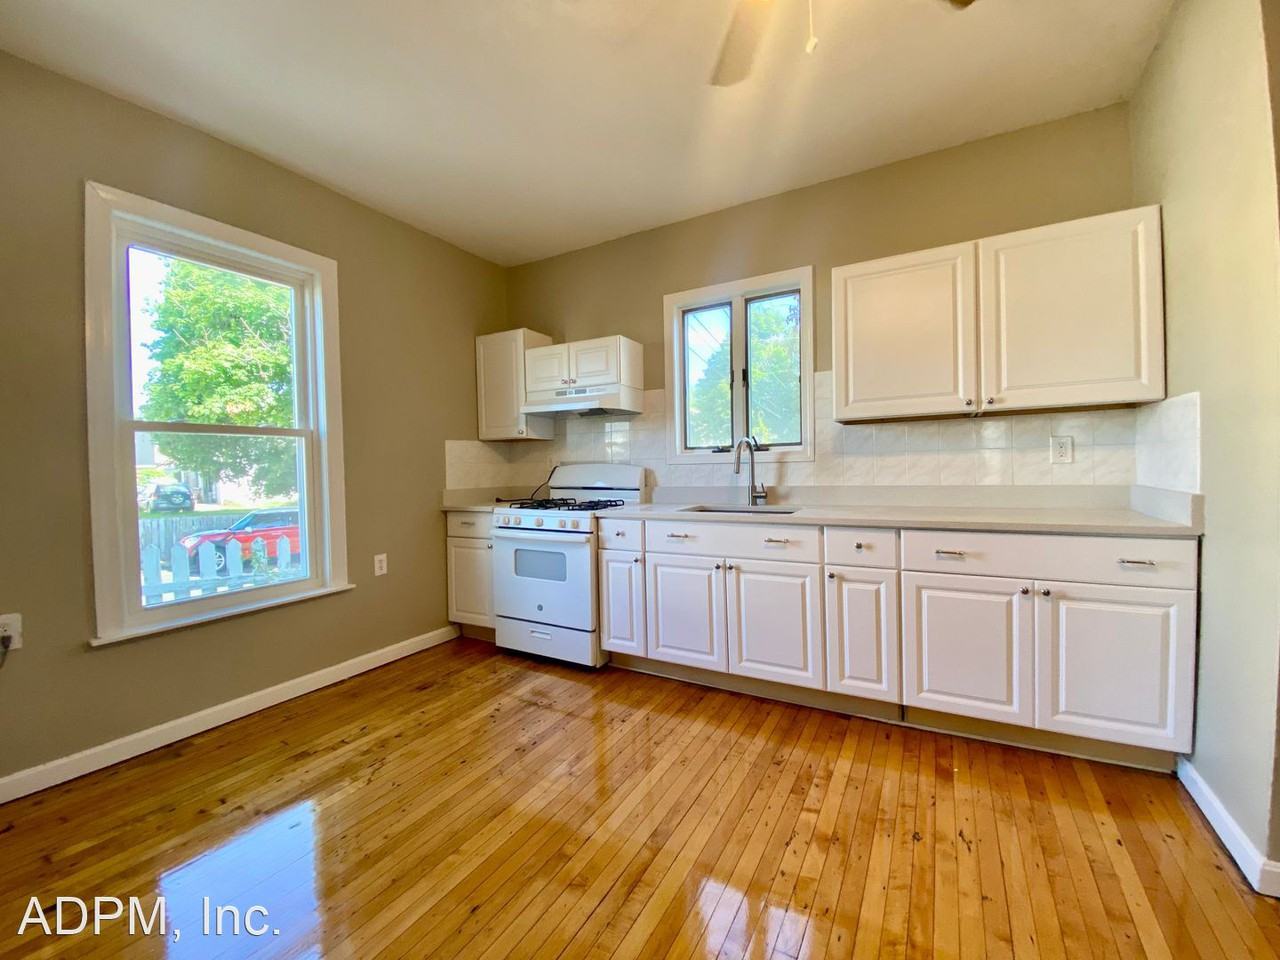 40 Tremont St 1 Peabody Ma 01960 2 Bedroom House For Rent For 2 400 Month Zumper